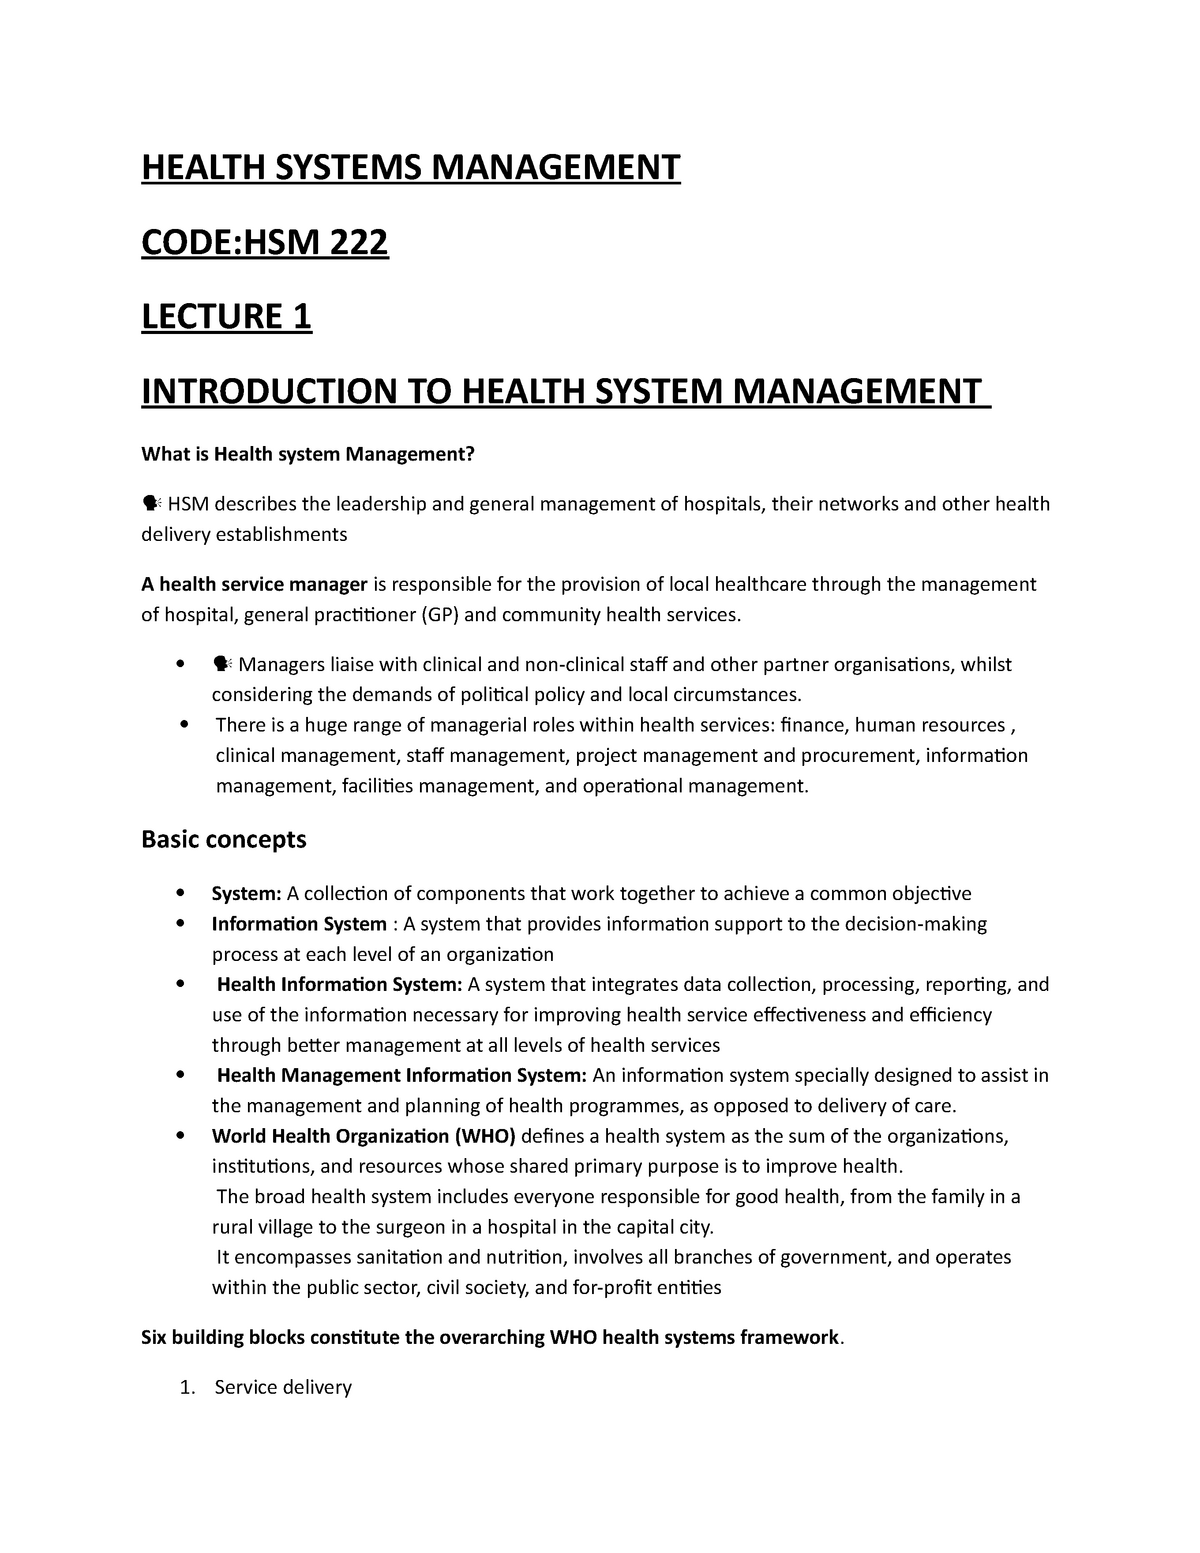 clinic management system thesis pdf